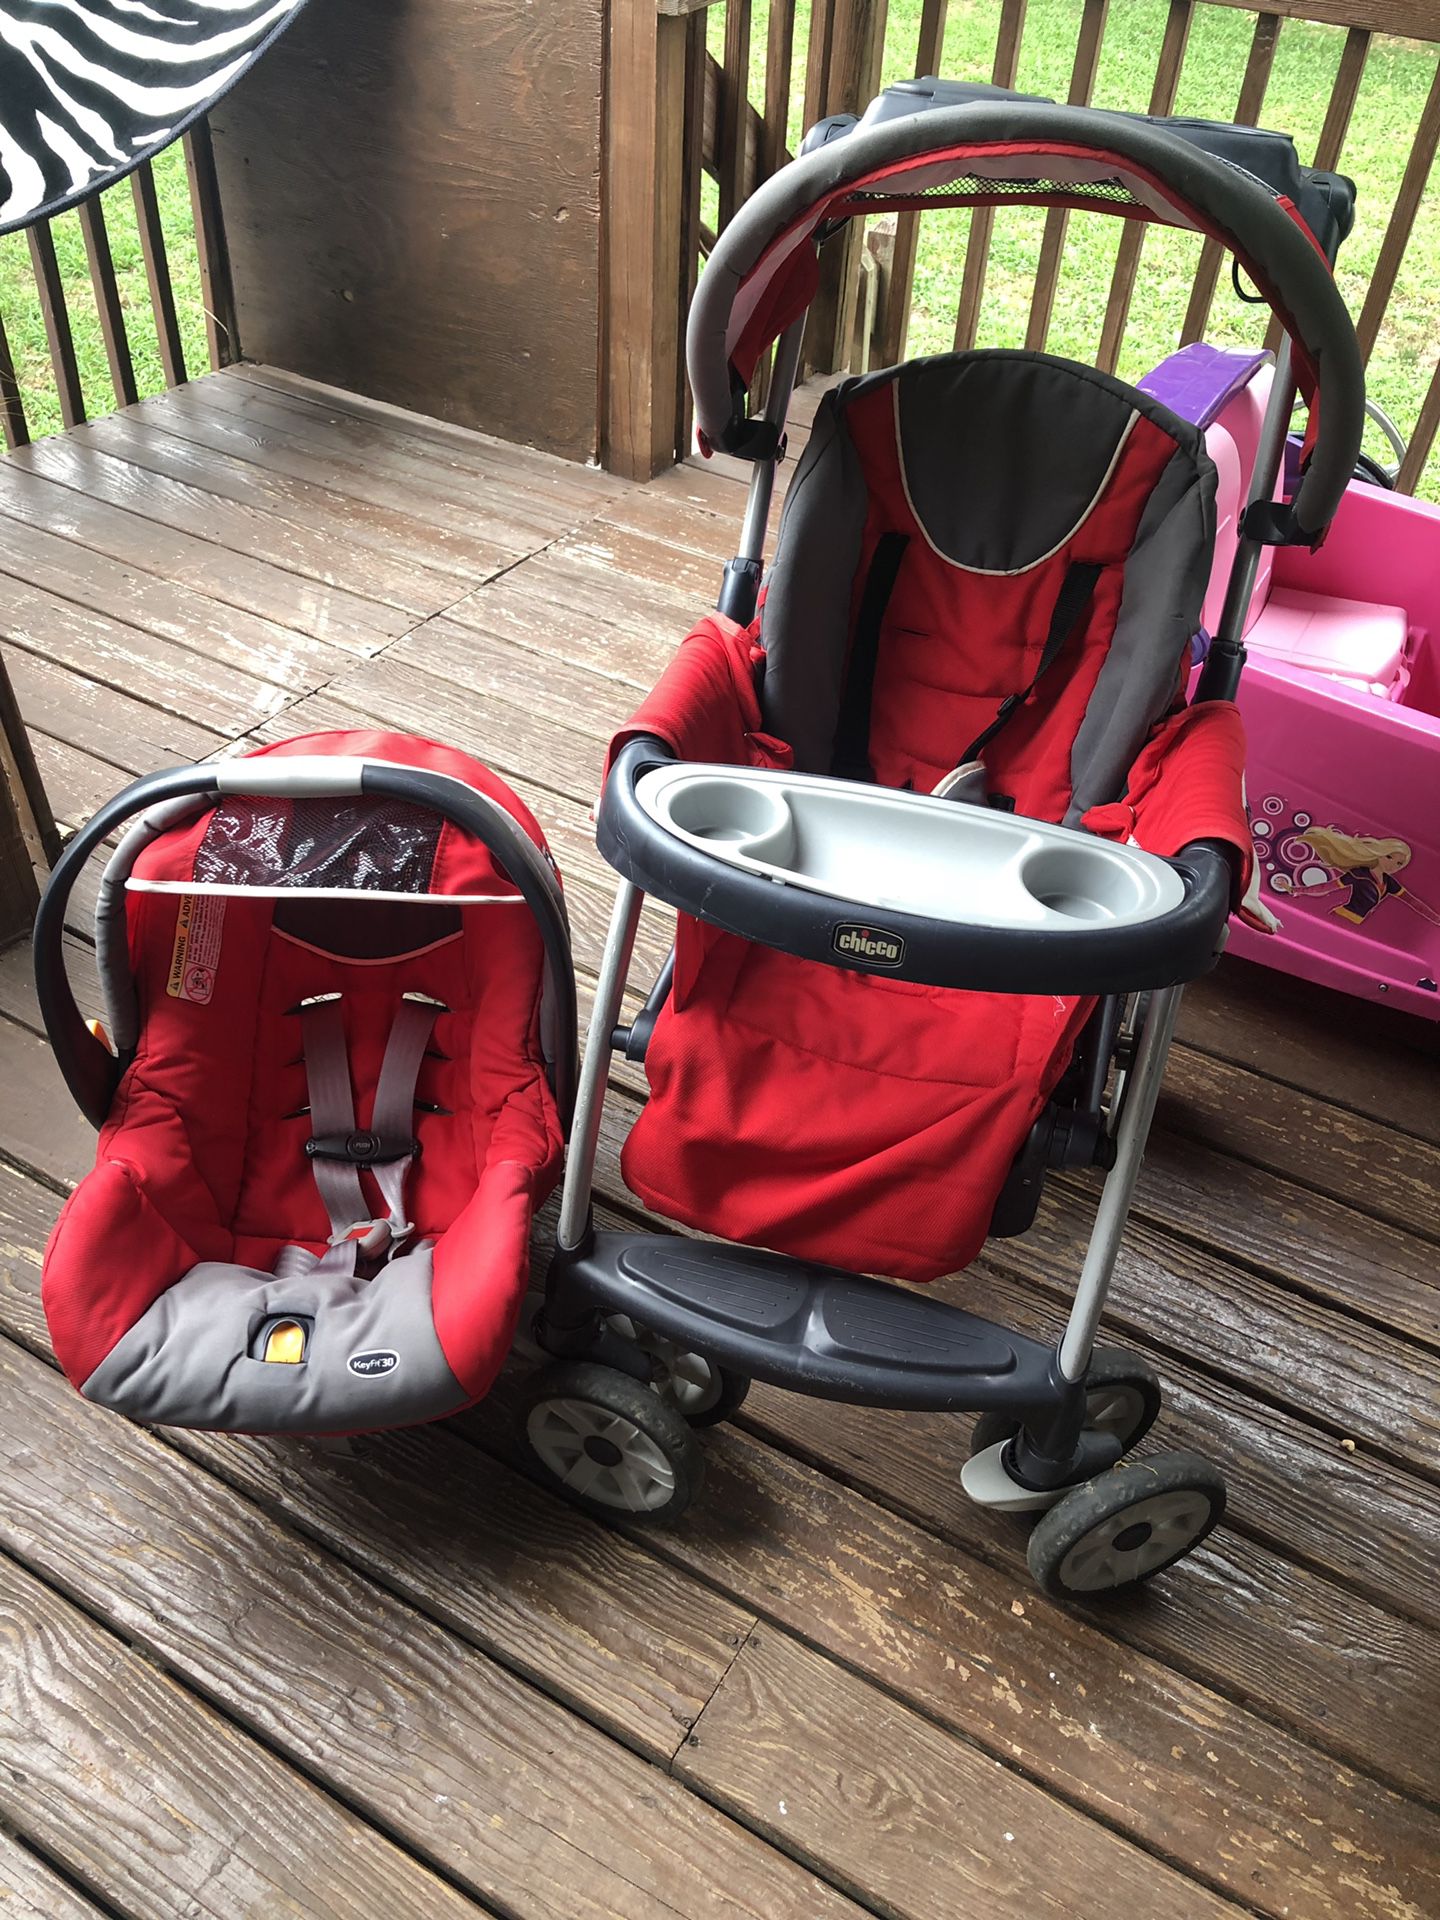 Chicco baby car seat and stroller